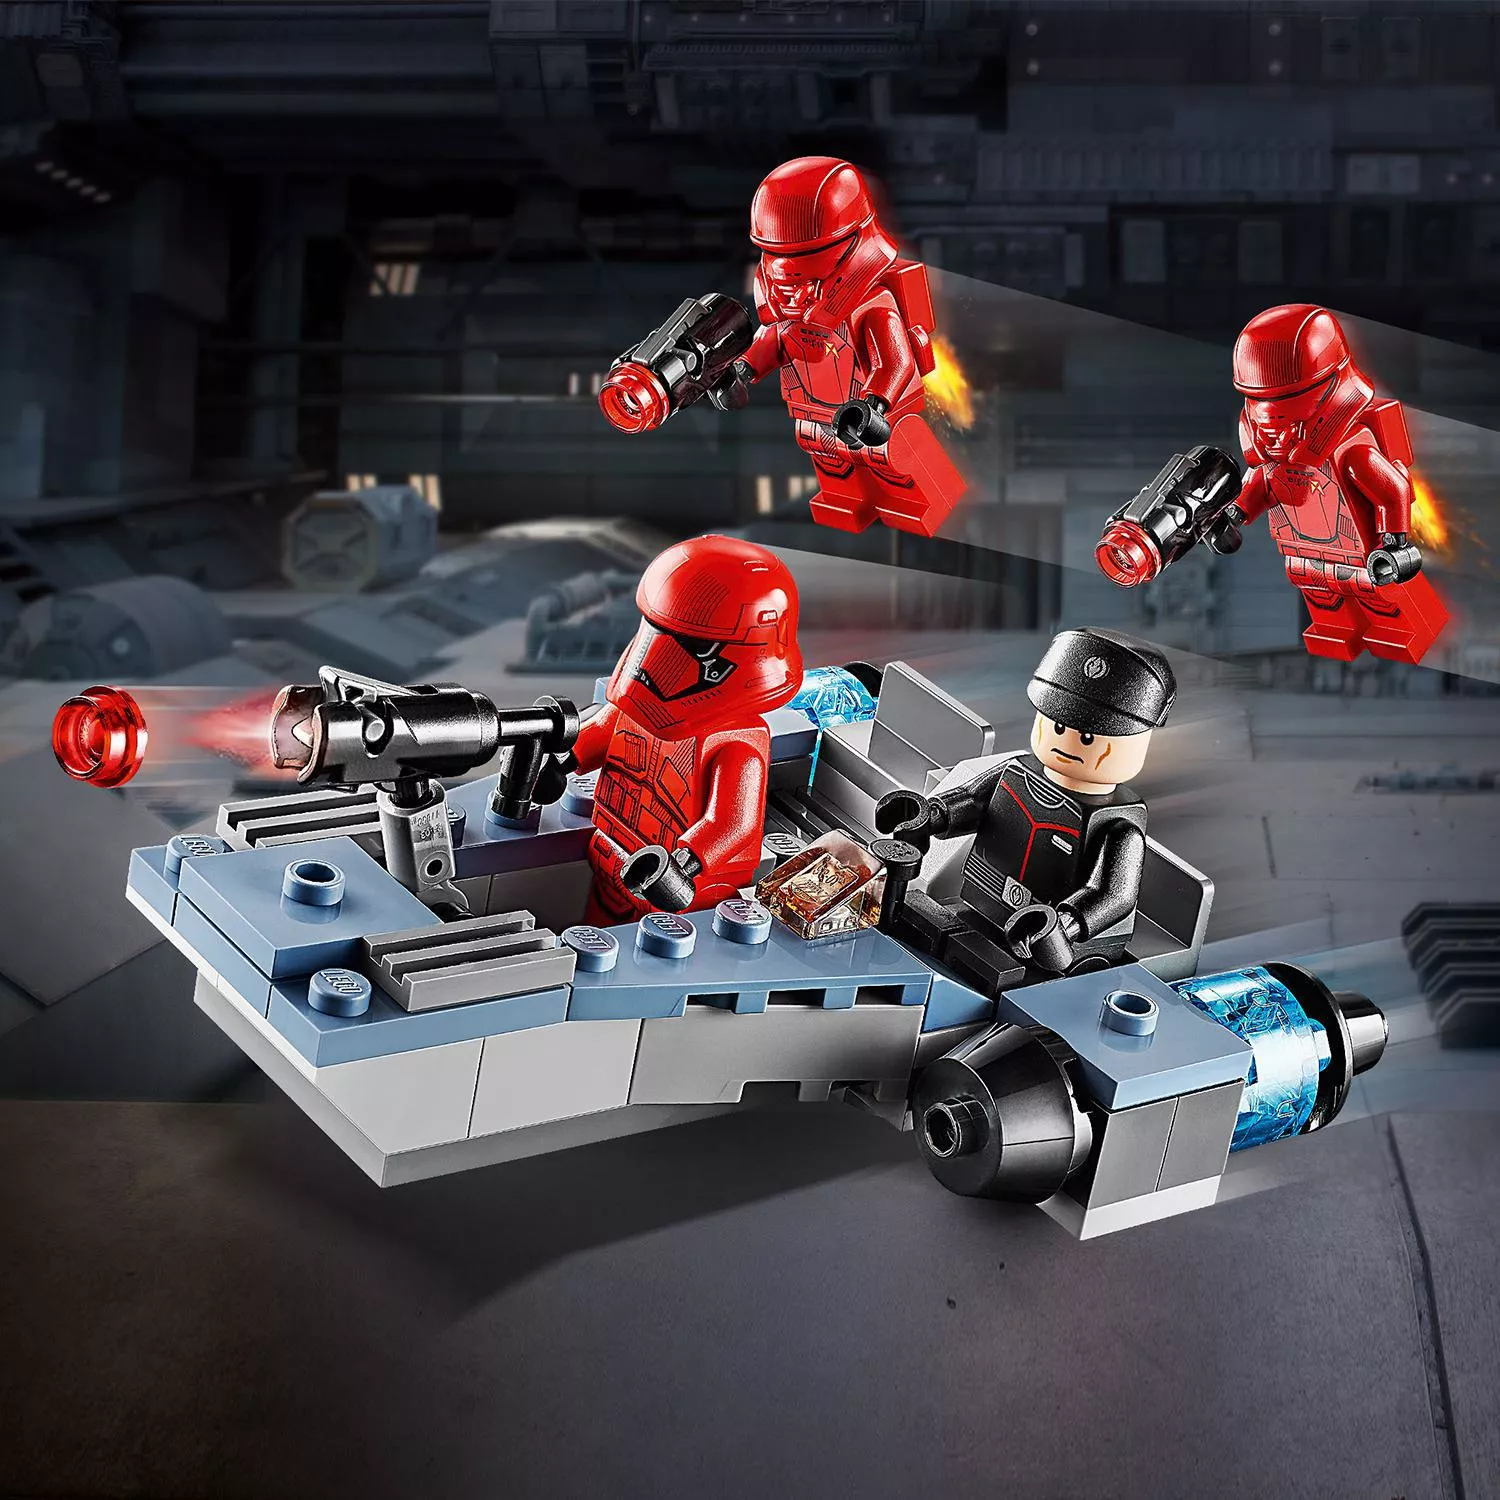 LEGO Star Wars Episode IX Sith Troopers Battle Pack